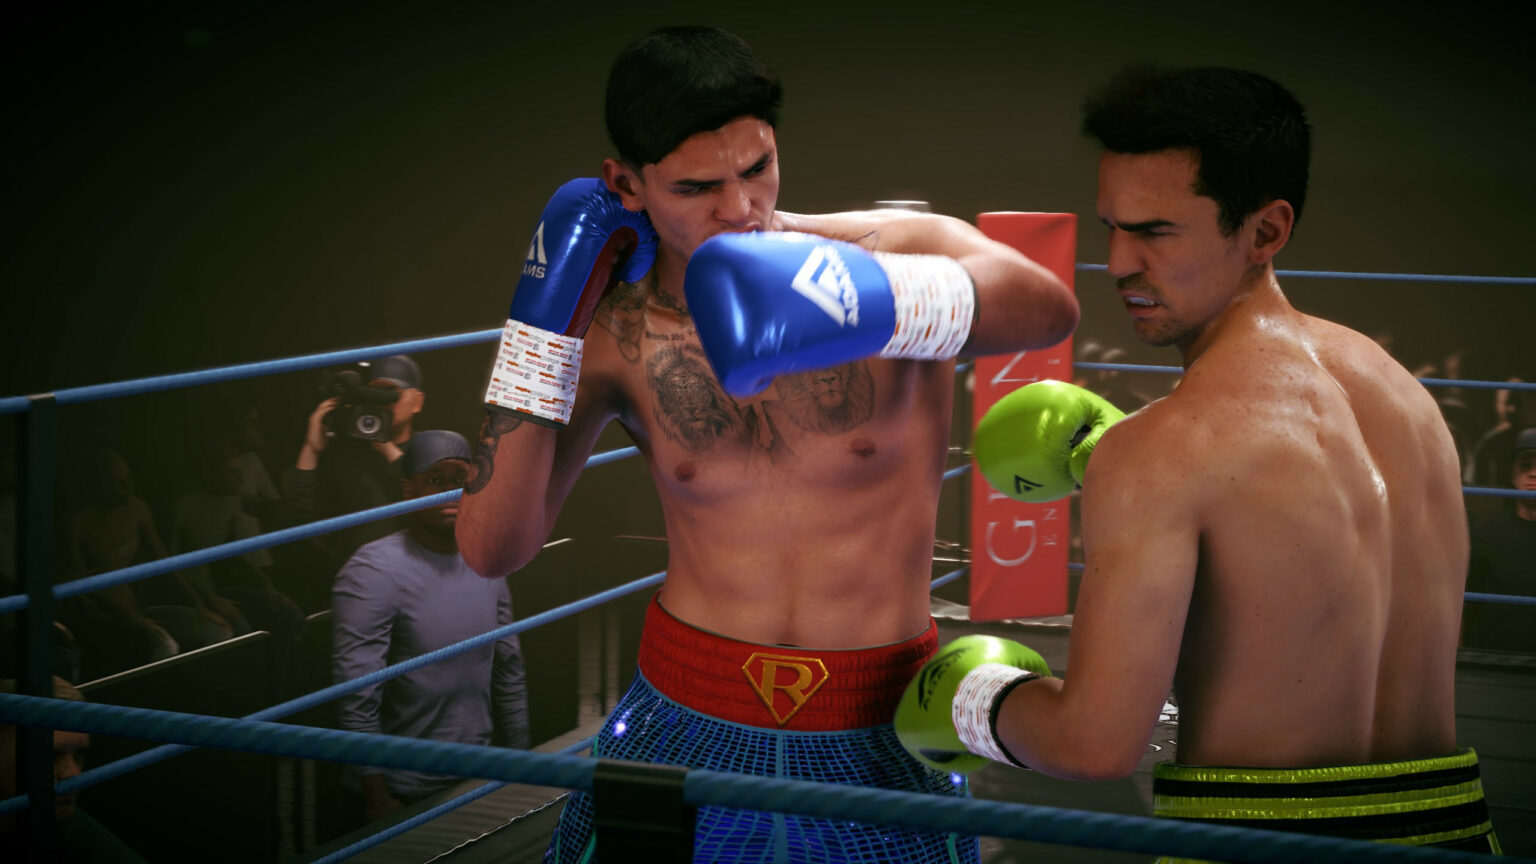 Esports Boxing Club Release Date, Roster And More Gameinstants